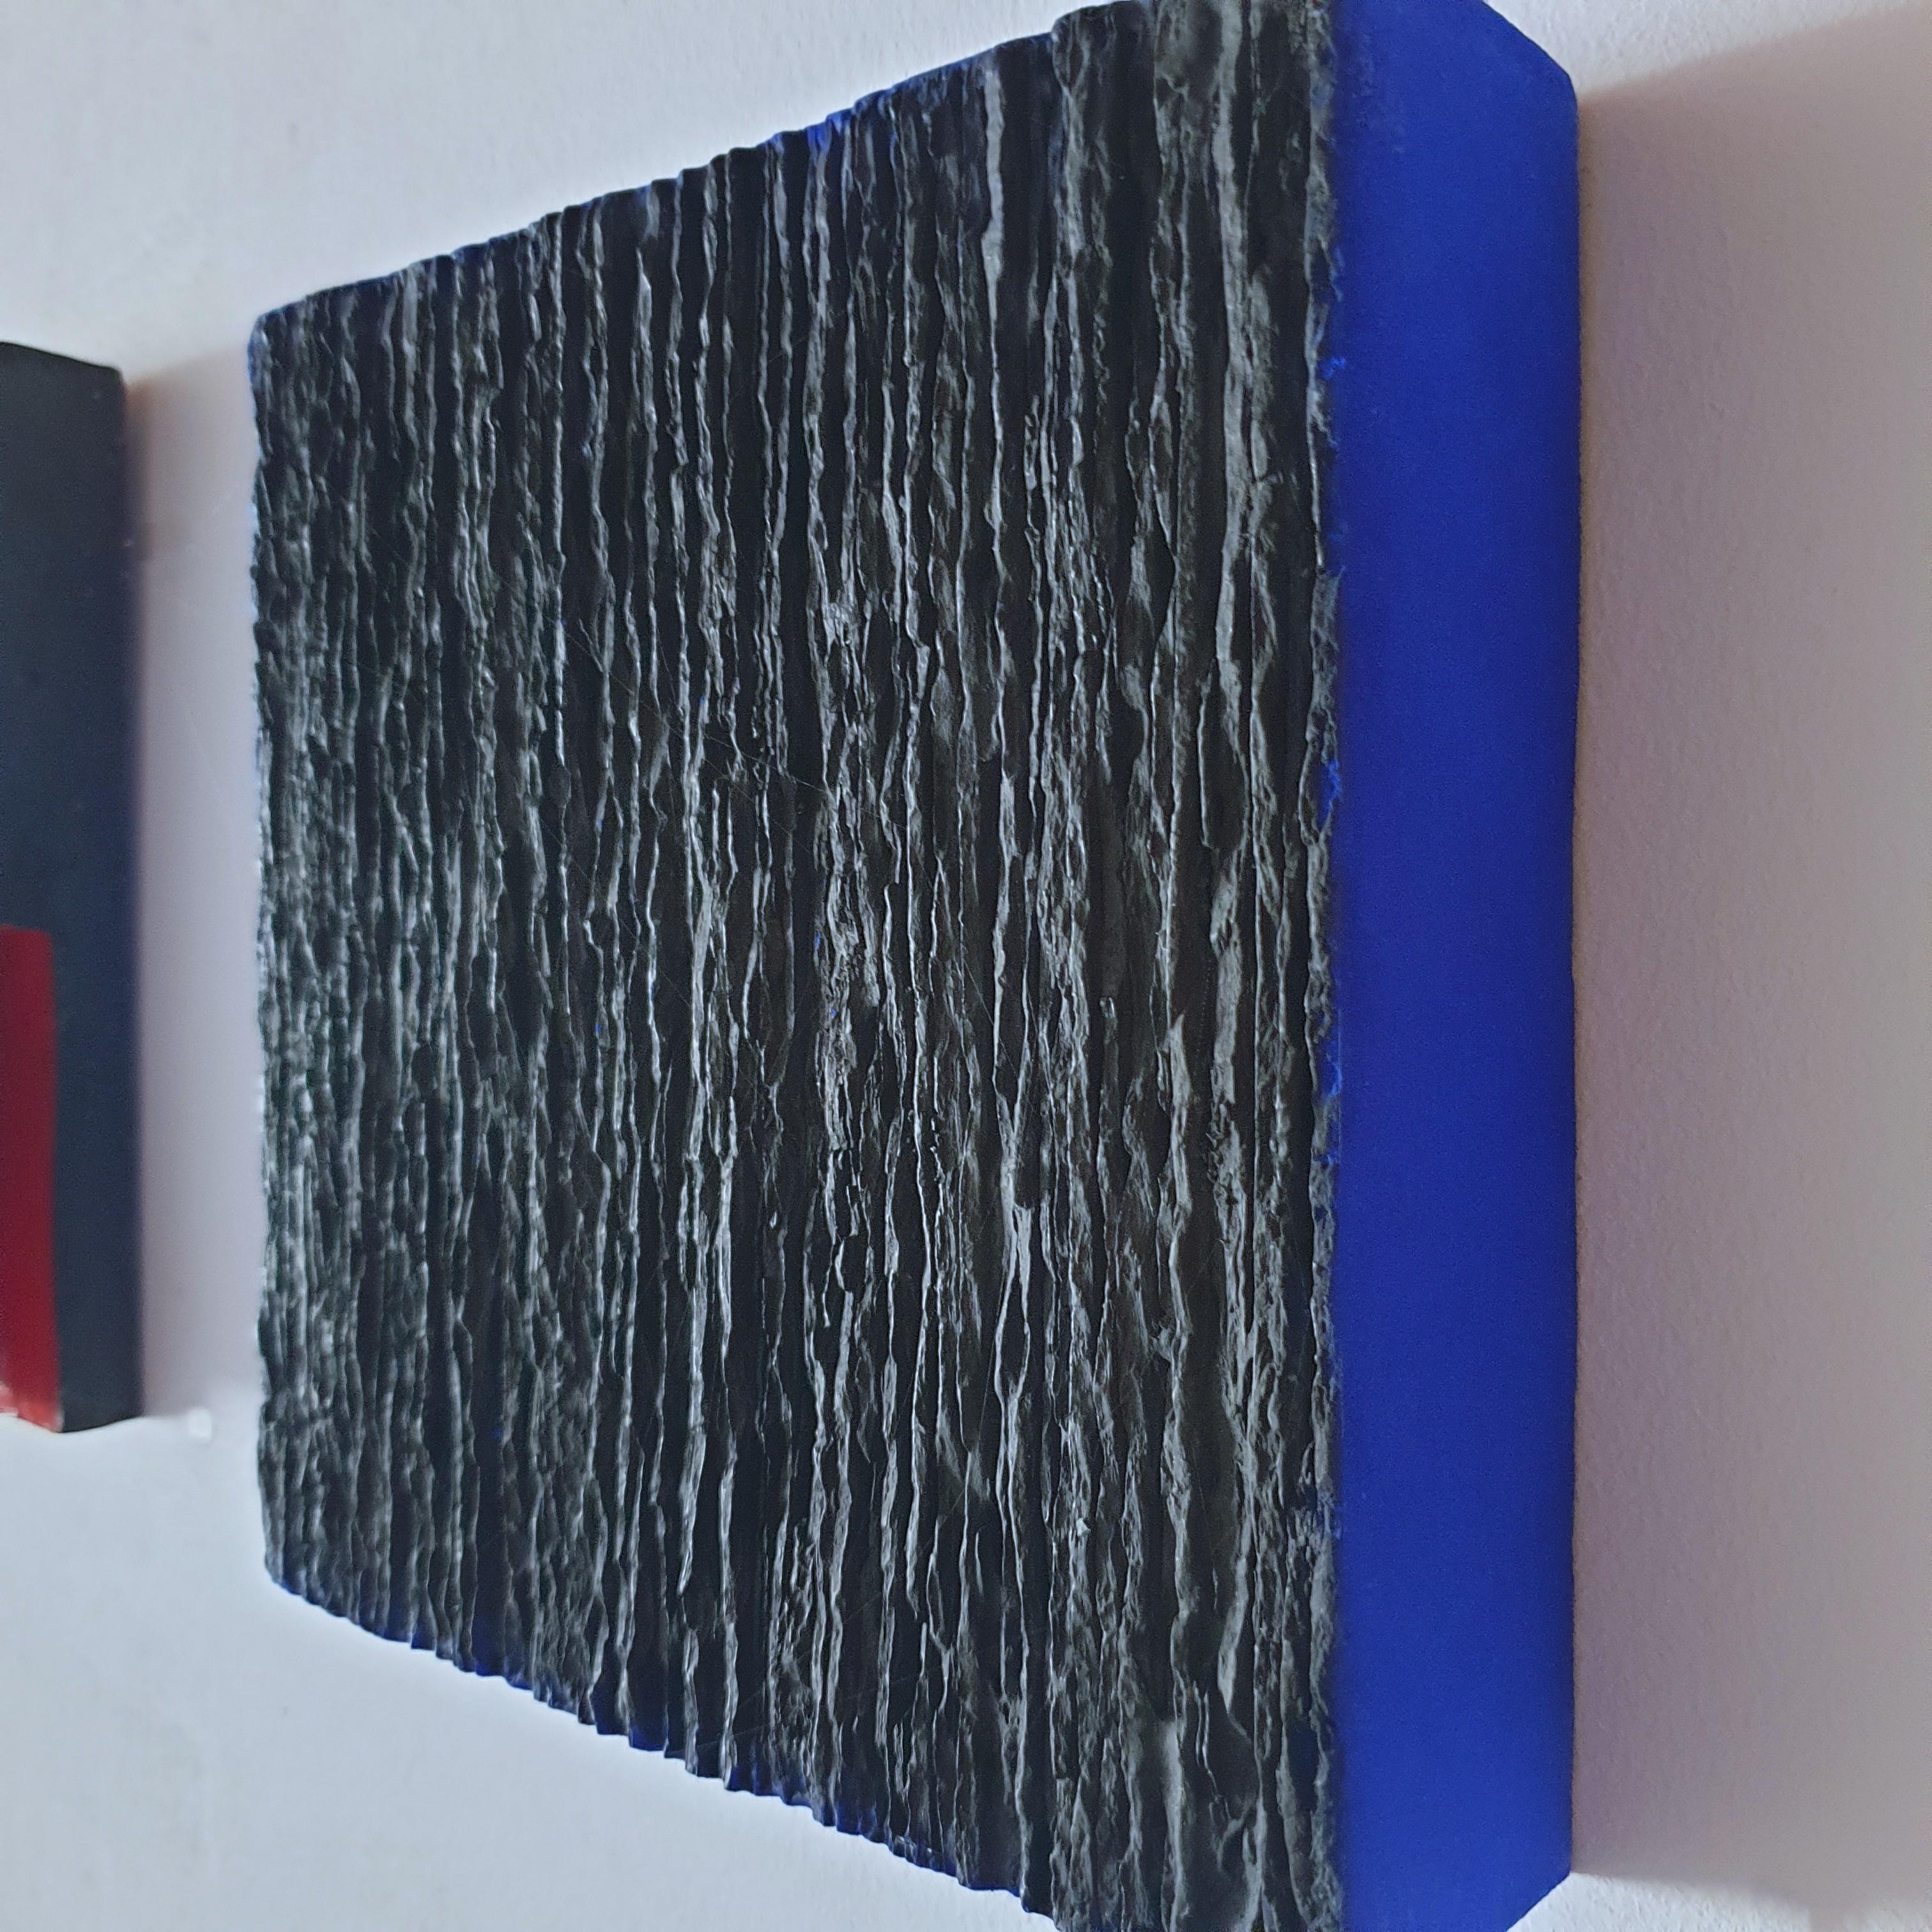 Space - black blue contemporary modern abstract sculpture painting relief - Black Abstract Sculpture by Michiel Jansen